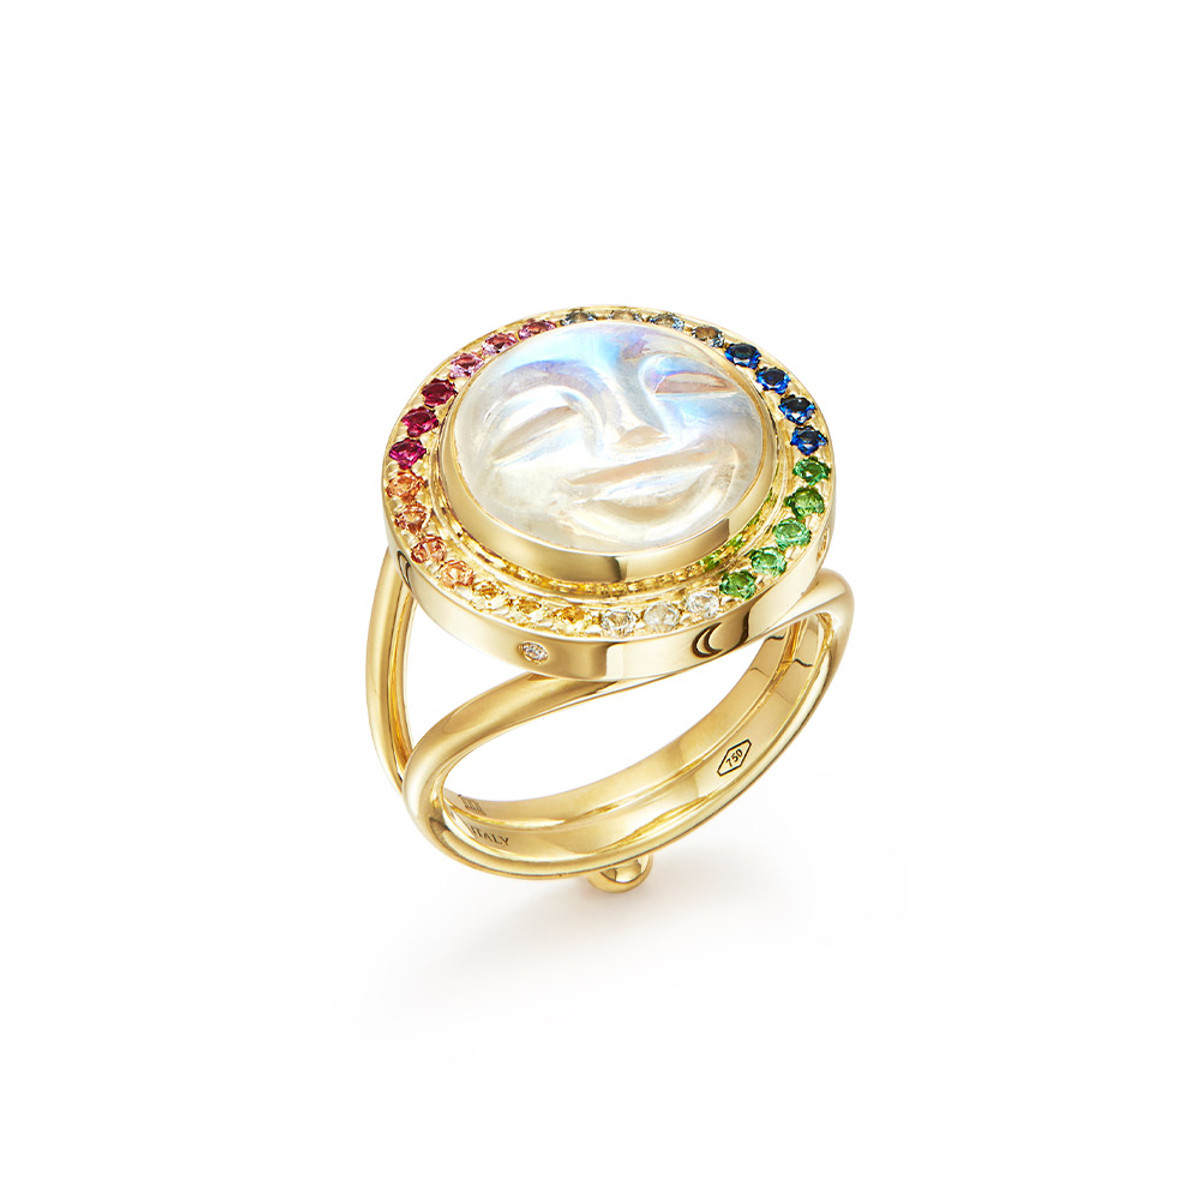 Temple St. Clair 18K Yellow Gold Blue Moonstone Moon Ring-56856 Product Image